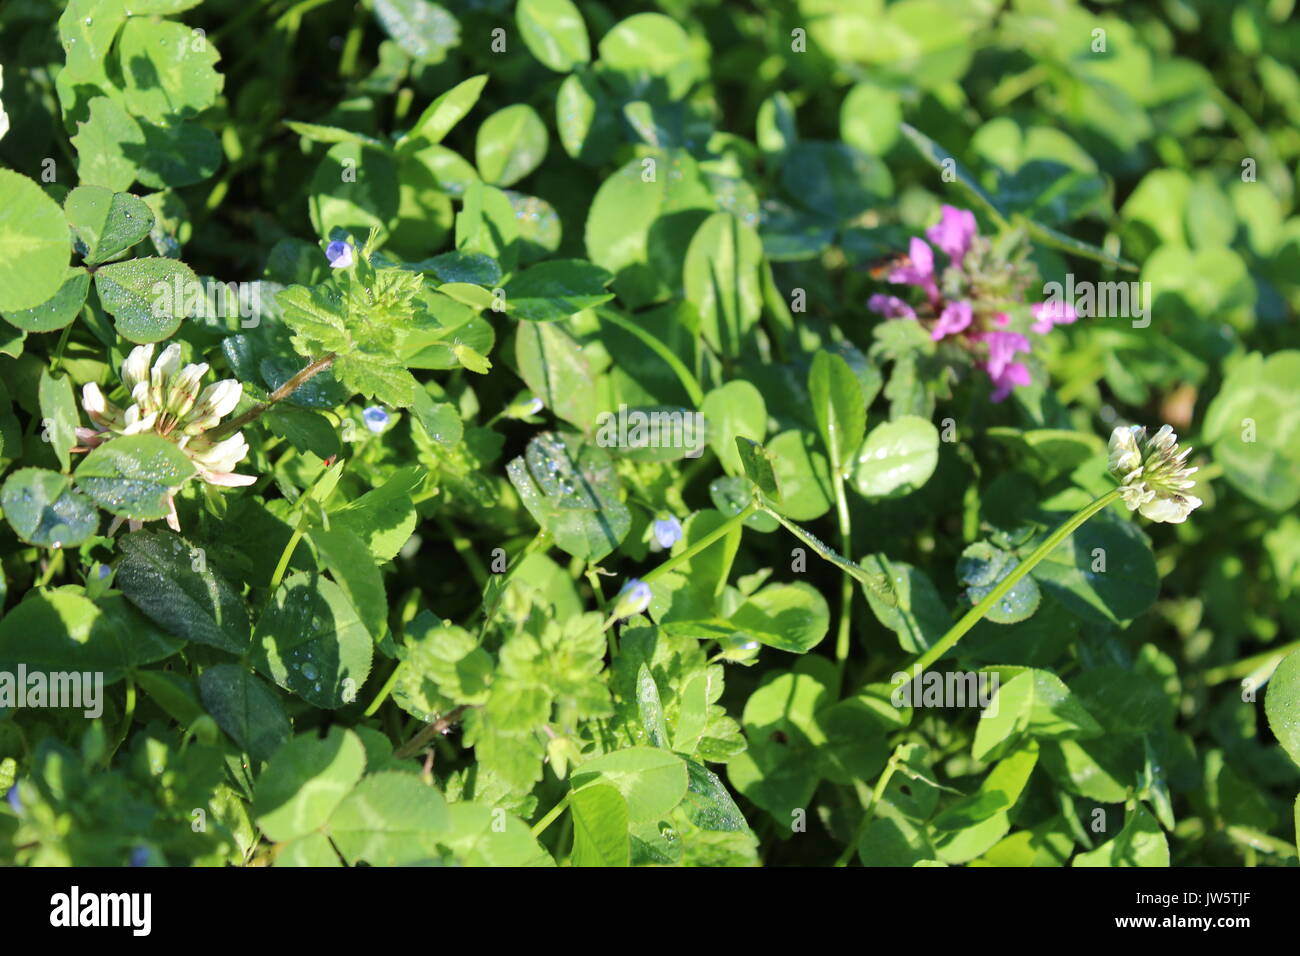 group of growing wildflowers white clover, blue speedwell and purple dead nettle Stock Photo